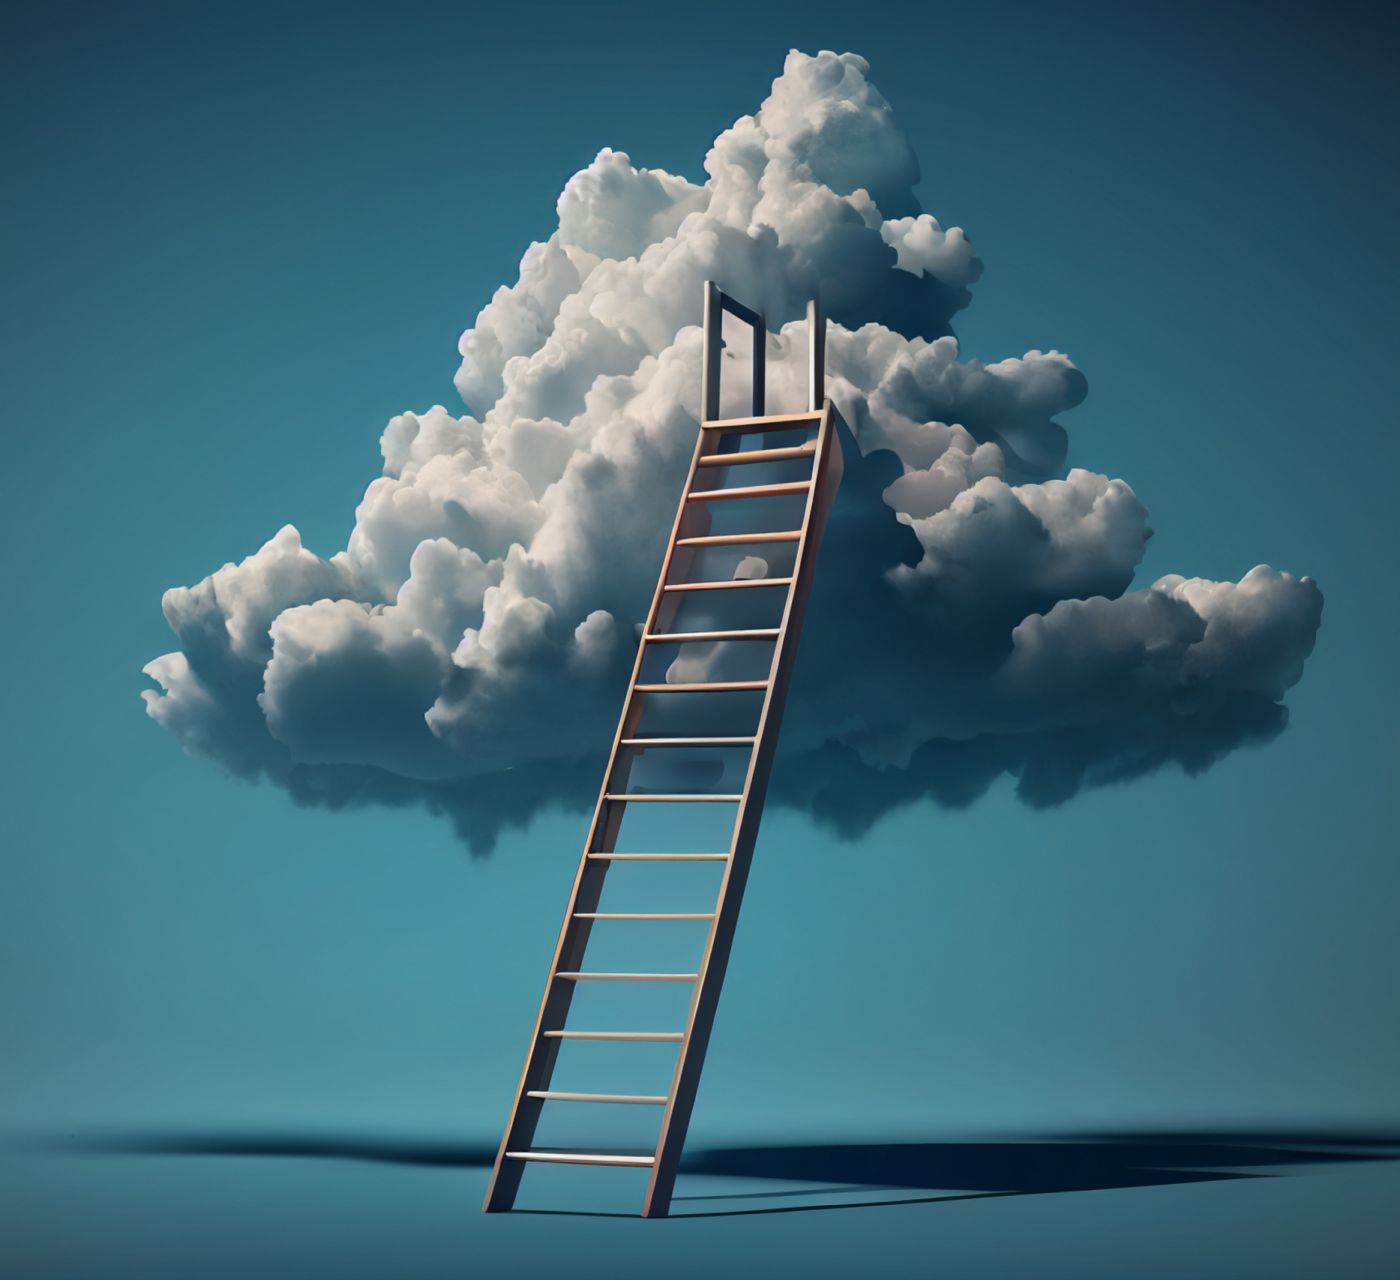 Cloud computing concept on sky, Development Attainment Motivation Career Growth, Ladder leading to cloud minimalistic style, image ai midjourney generated (Demo)